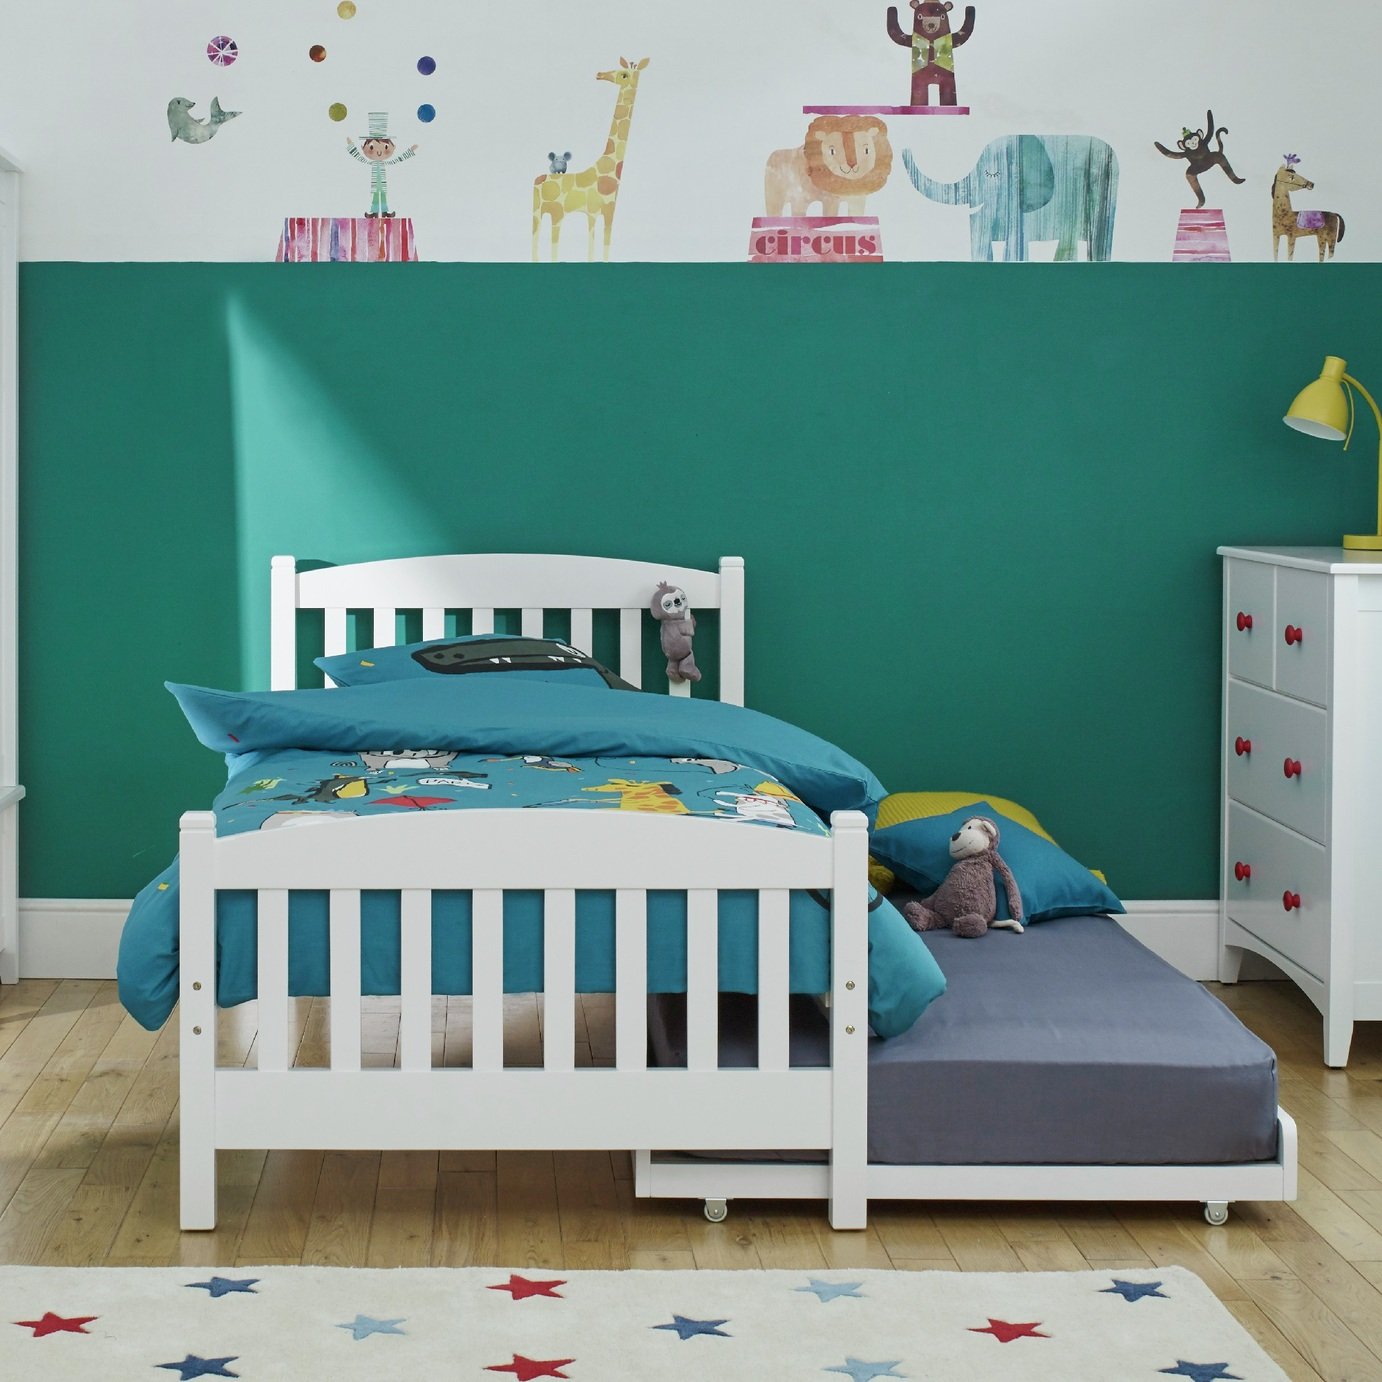 Snowy Single Bed Frame with Trundle Review